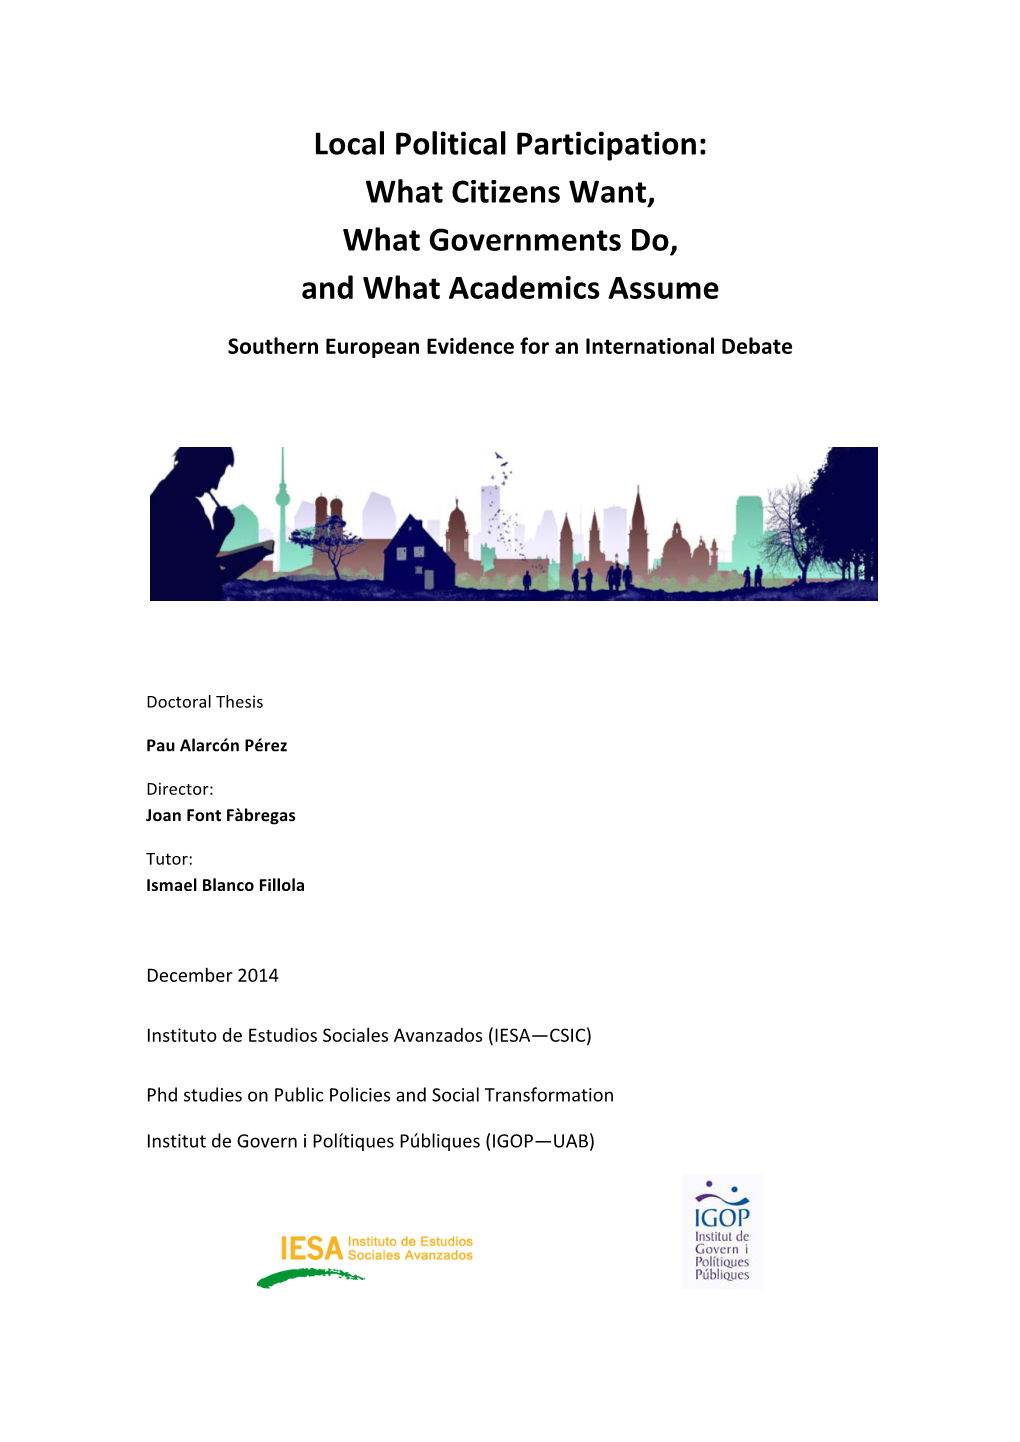 Local Political Participation: What Citizens Want, What Governments Do, and What Academics Assume